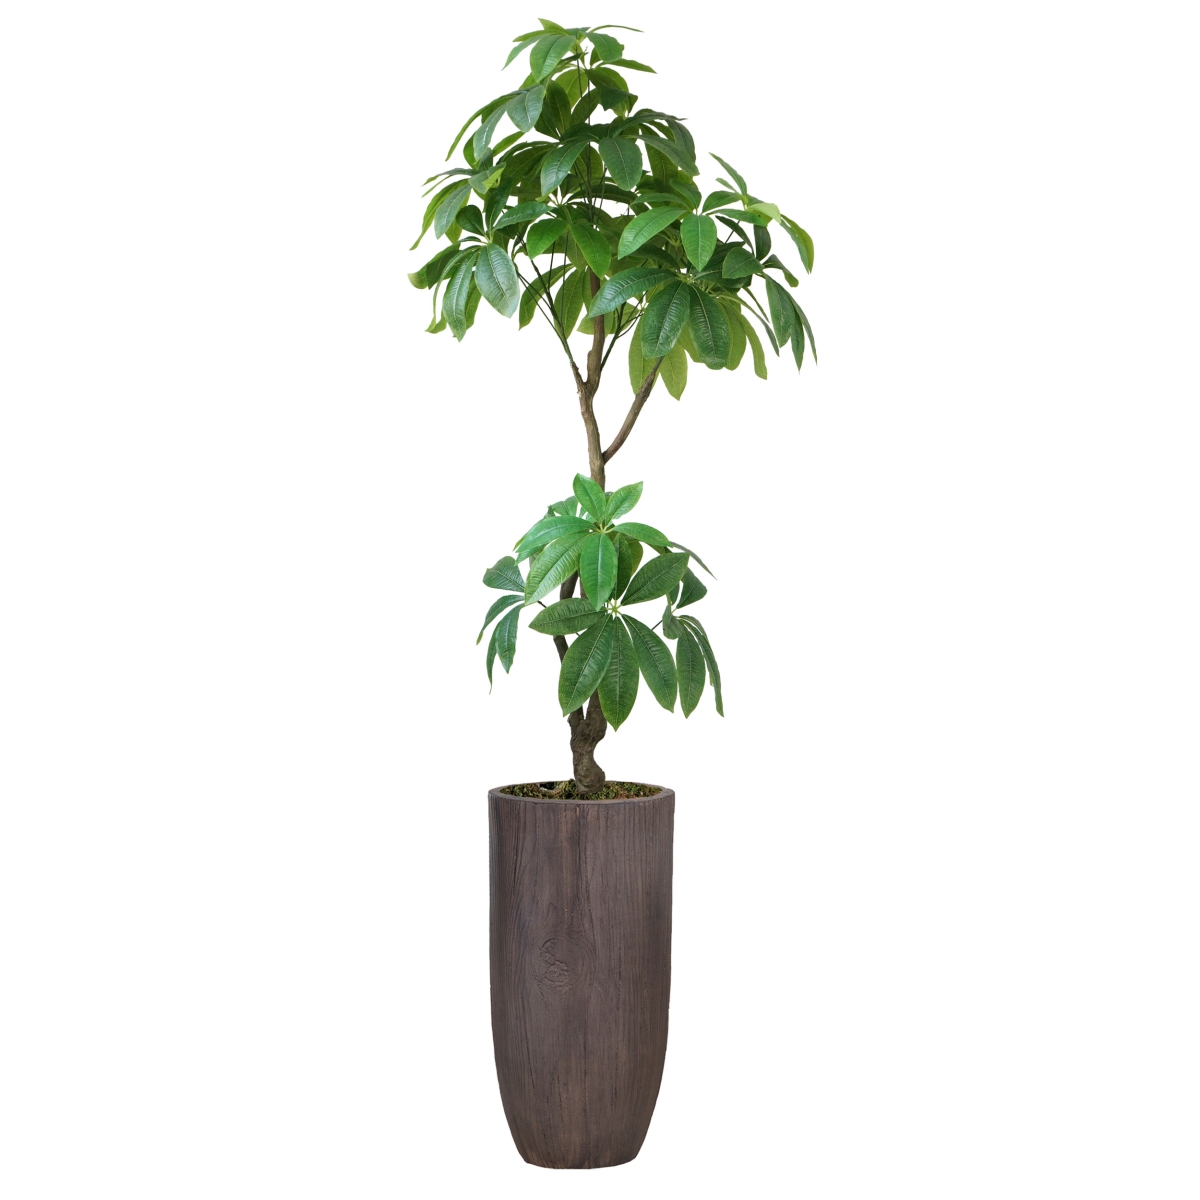 Vhx142224 46.25 In. Indoor & Outdoor Real Touch Pachira Aquatica Plant In Resin Planter